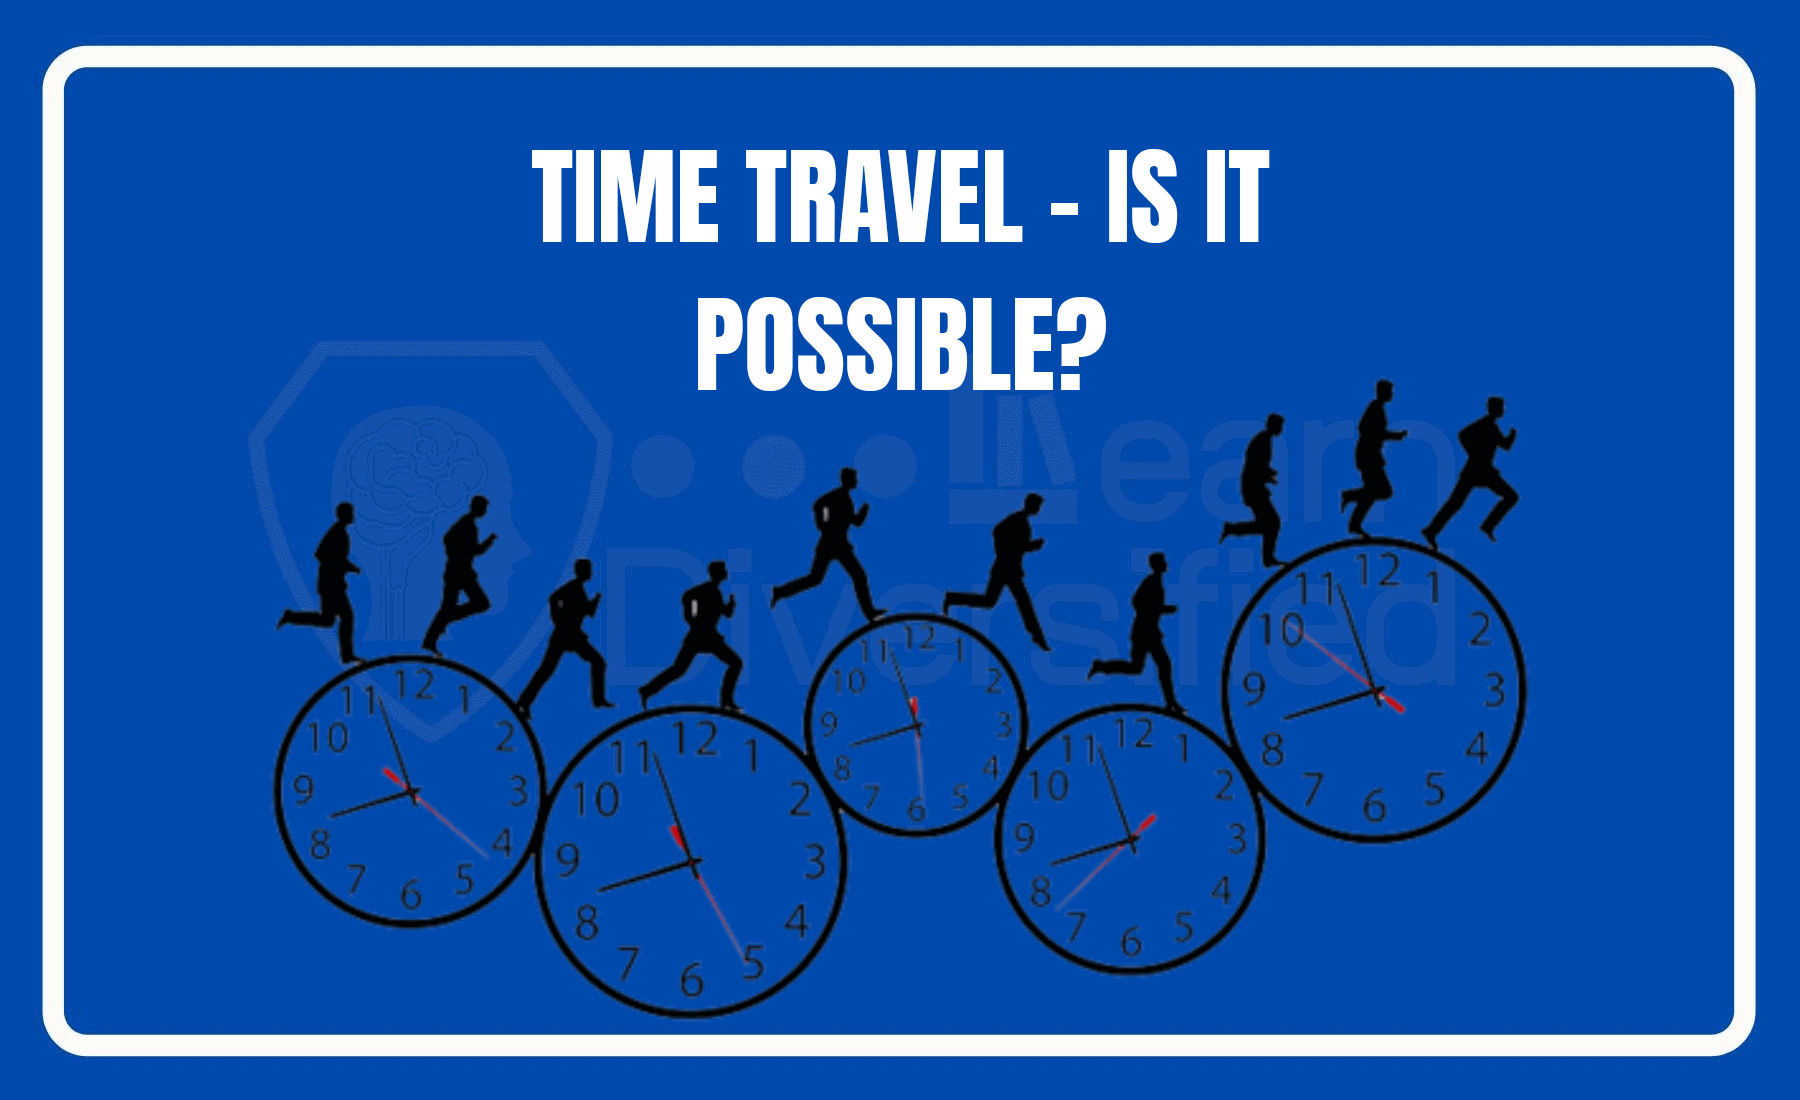 Travelling is possible. Travel time бренд. Фон ВК time to Travel.